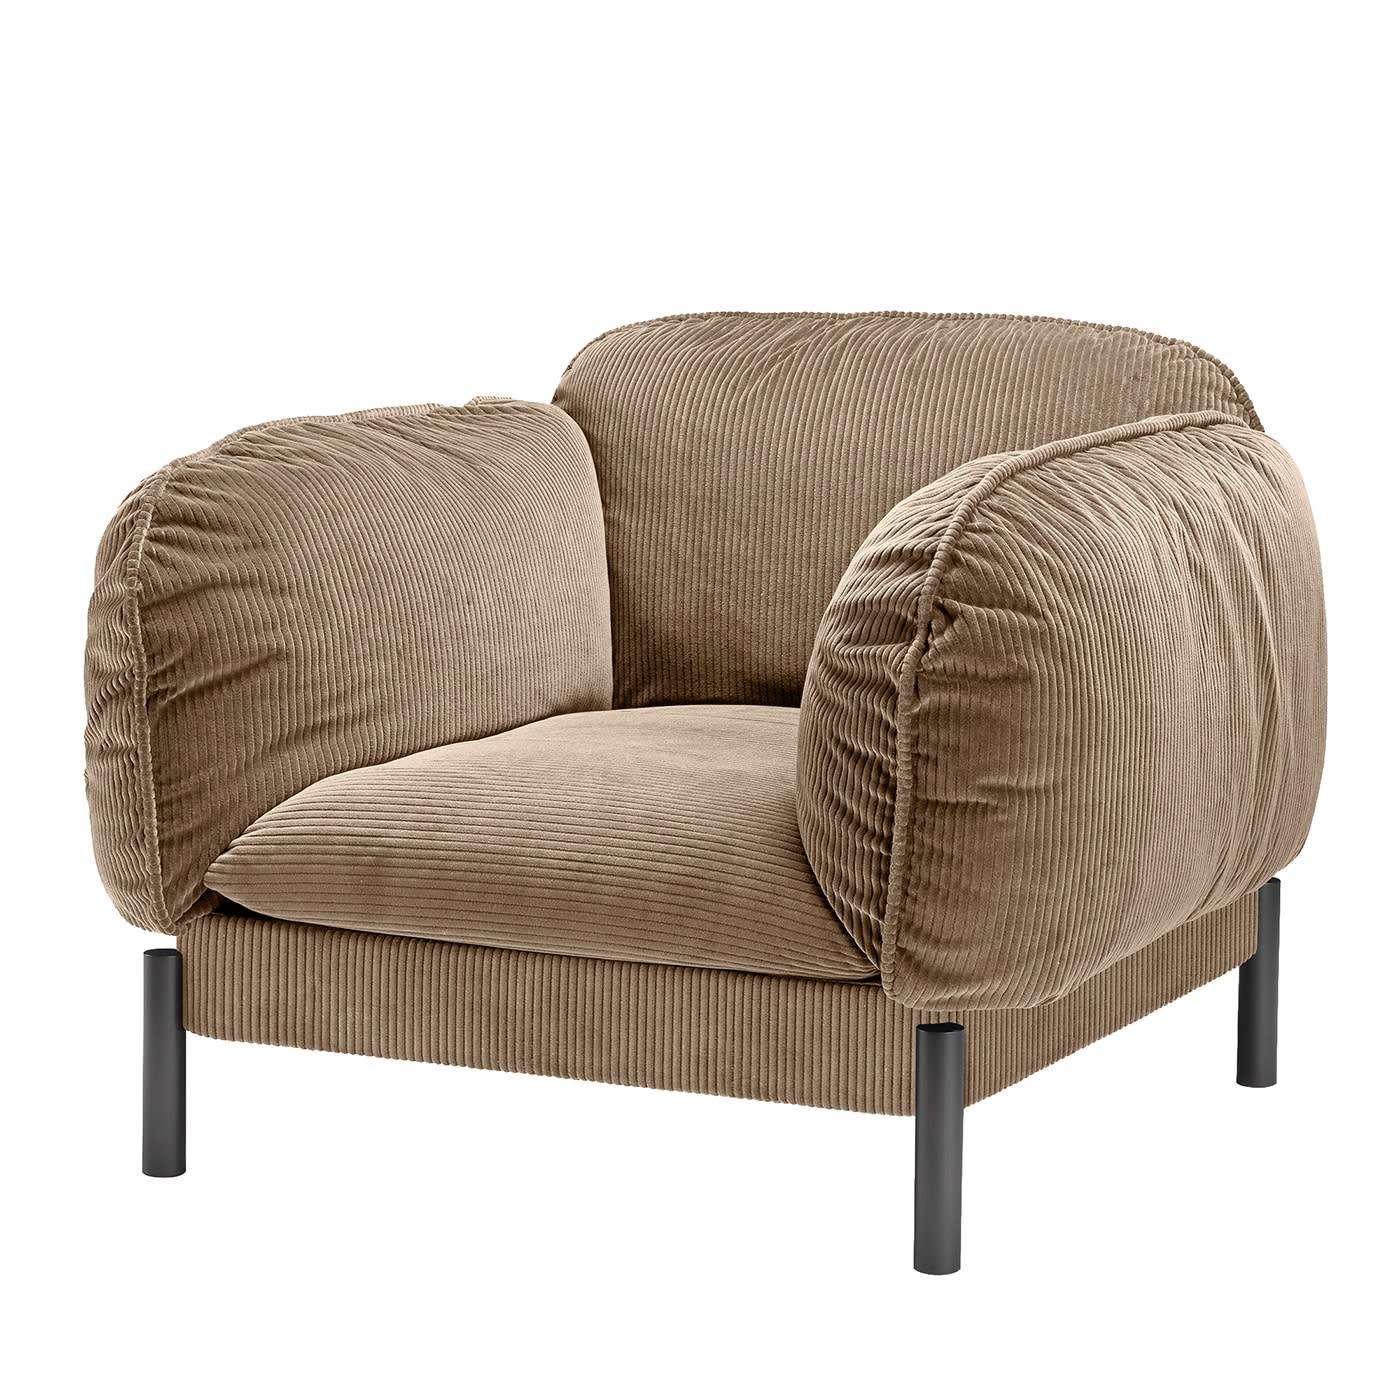 This plush armchair was designed by Lorenza Bozzoli as a nest where to enjoy the embrace of generous padding coupled to the soft caress of a brown corduroy upholstery. Raised on sober cylindrical feet finished in black, the plump seat has its